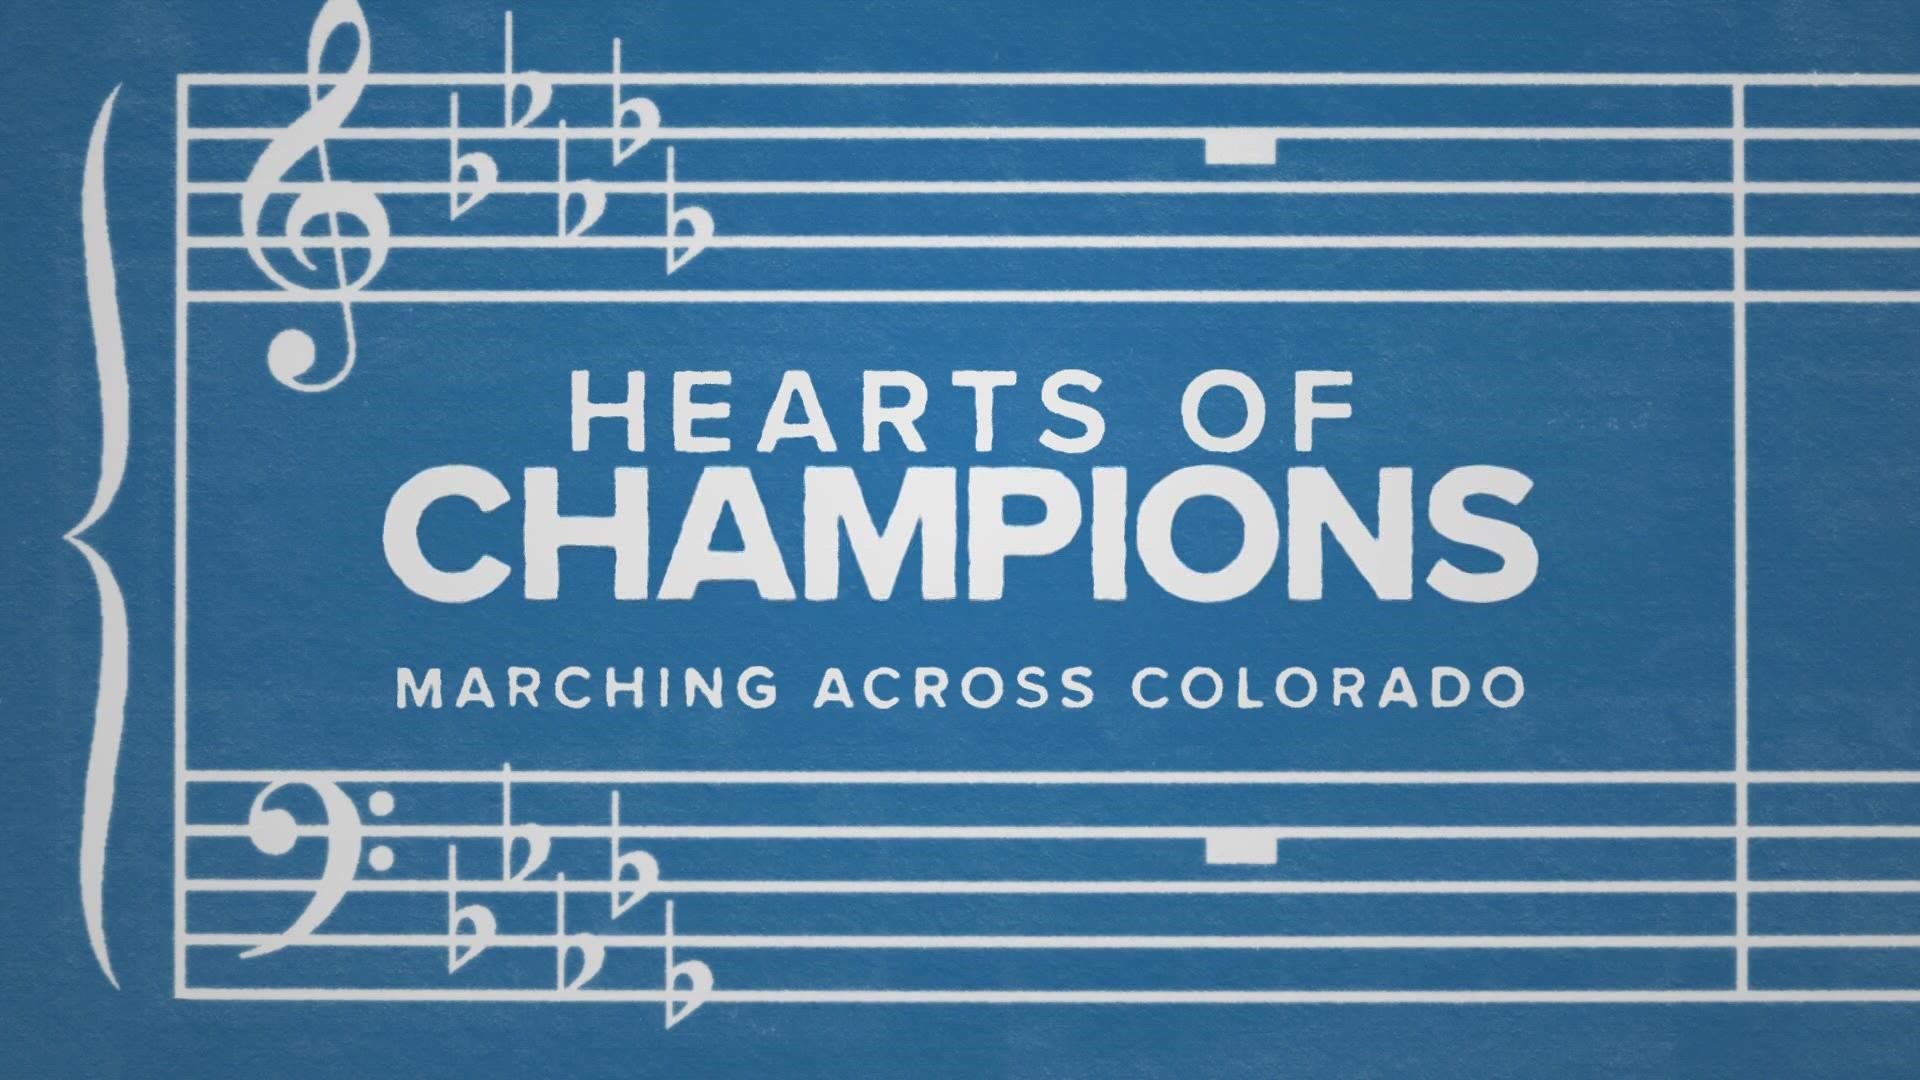 How Colorado’s high school marching bands prepared over the summer for this championship season with renewed support from their schools and communities.